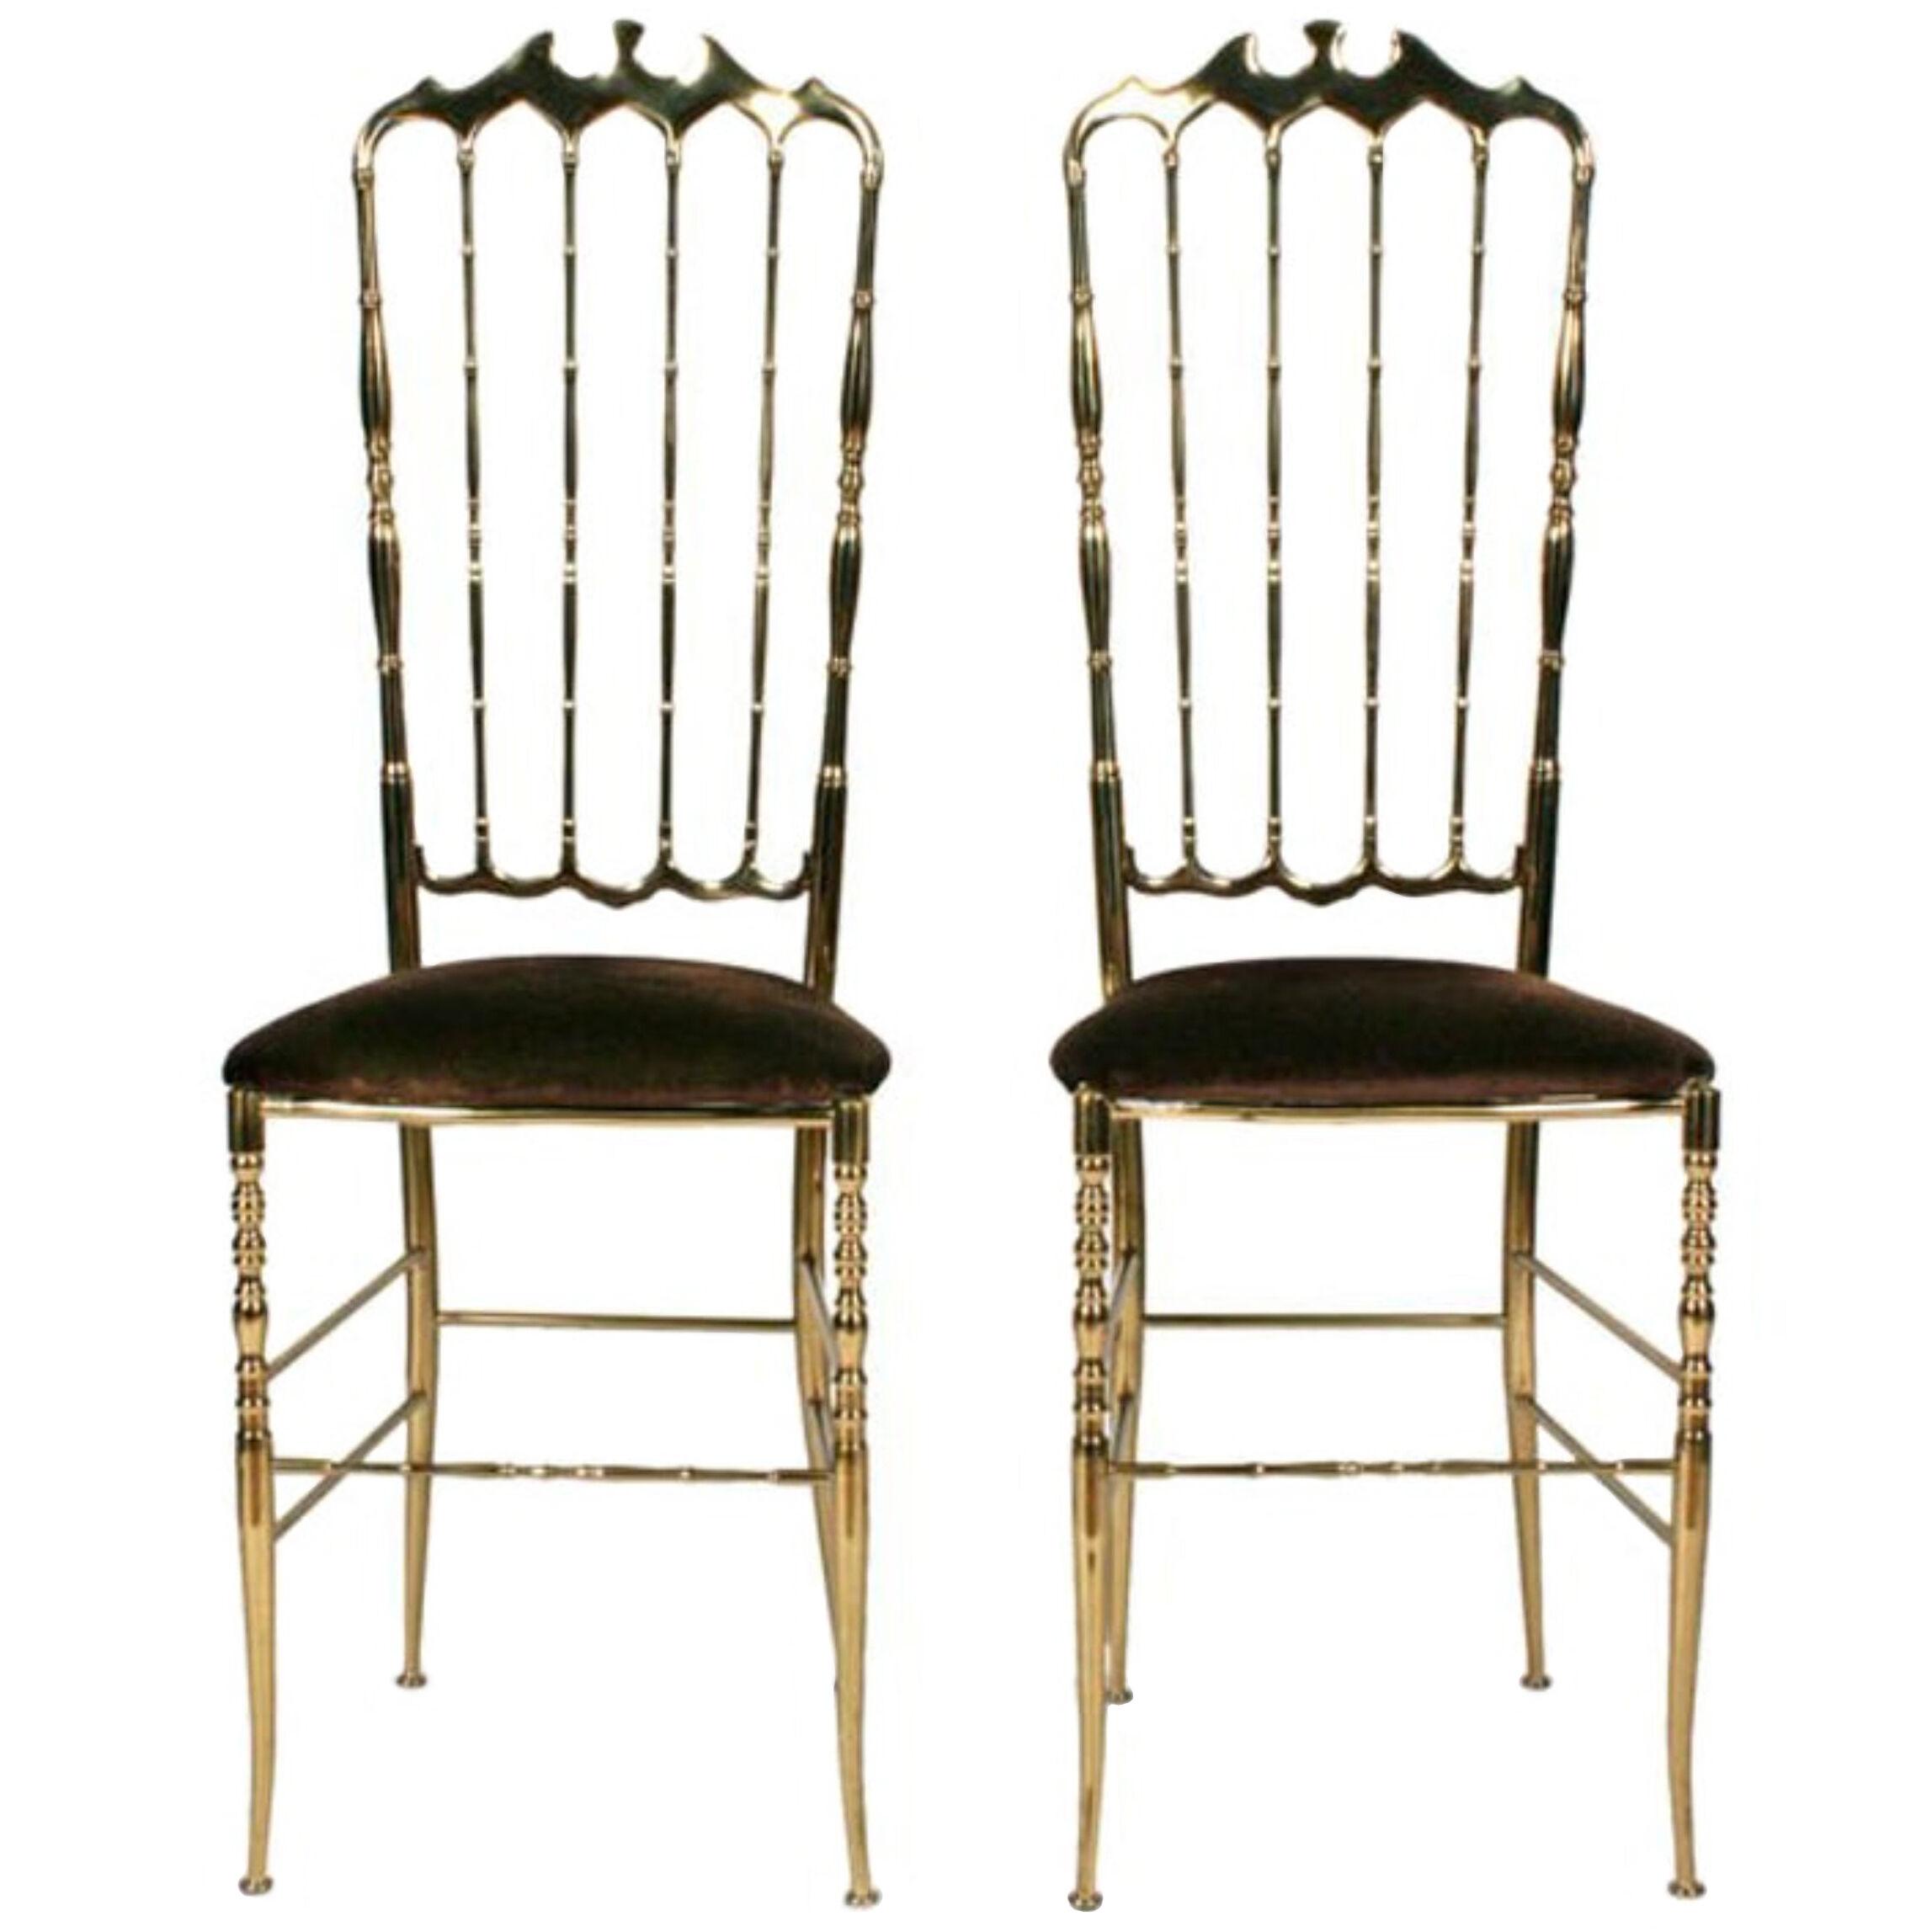 Pair of Brass High Back Side Chairs by Chiavari